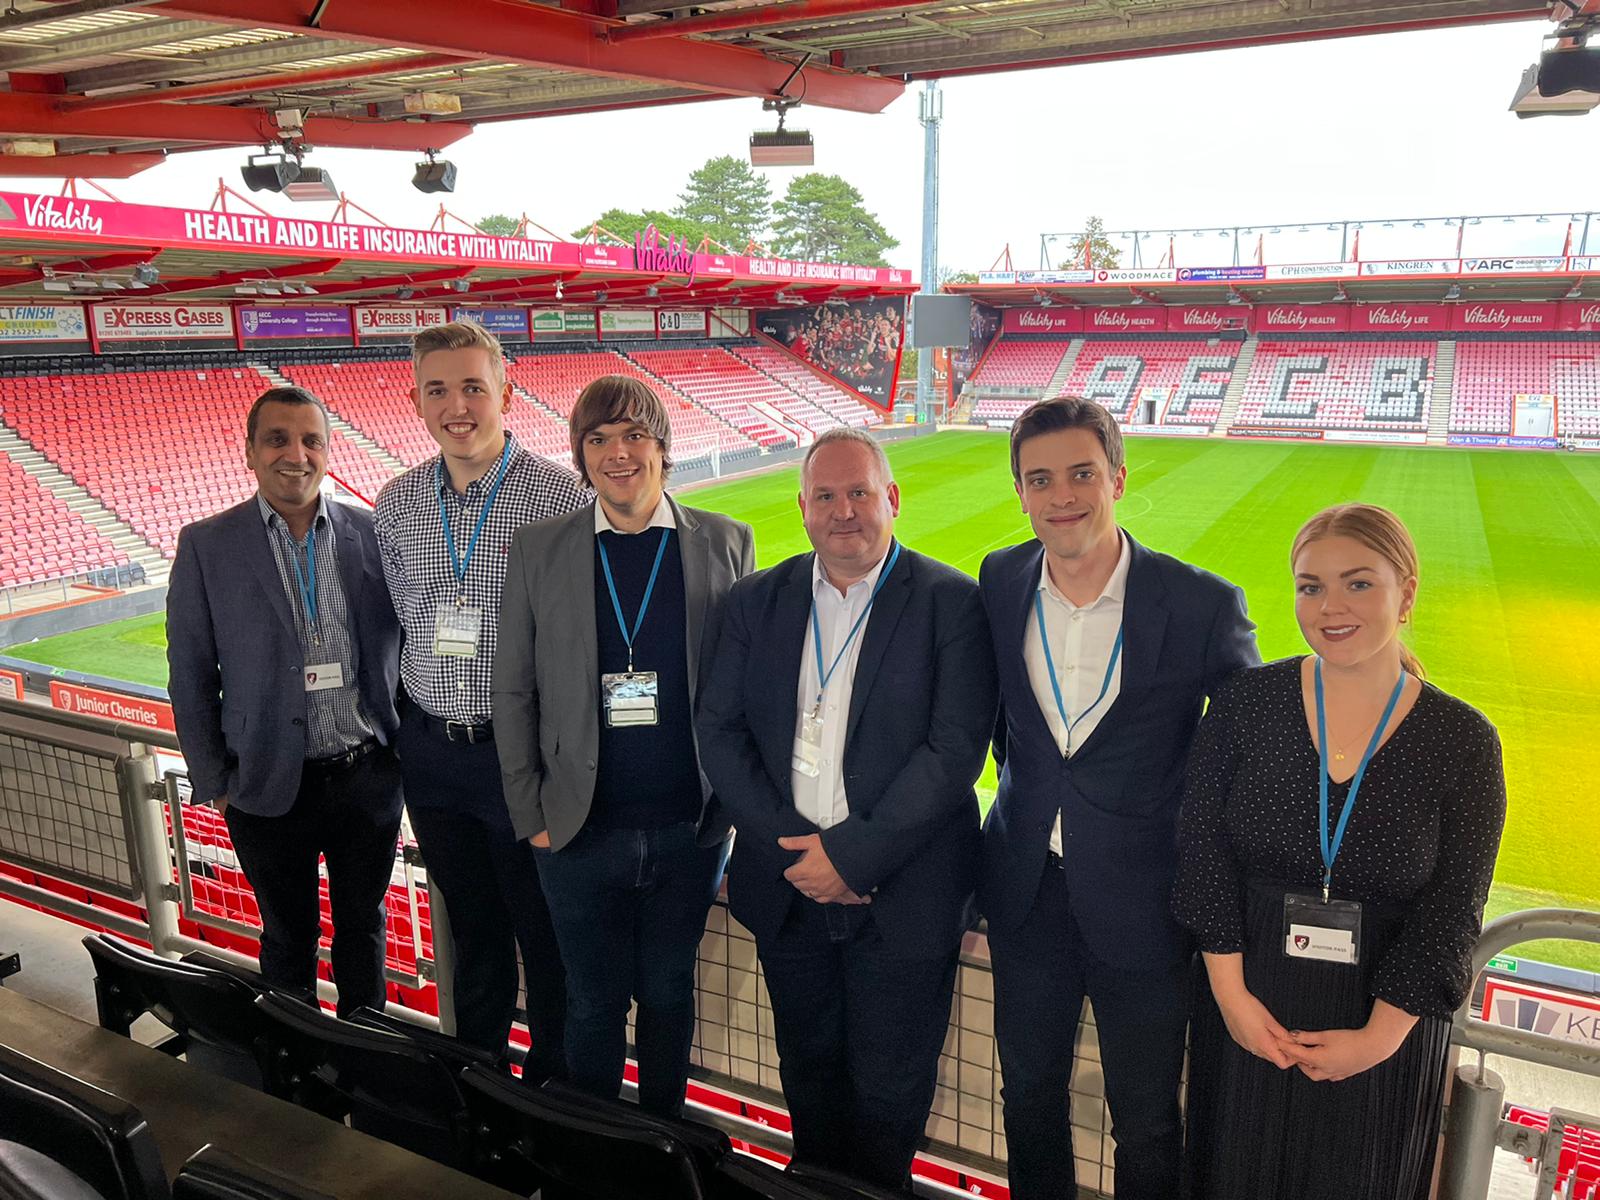 A photograph of staff from Grapevine and Gamma taken from the viewing boxes at AFC Bournemouth's stadium with the pitch and other stands in the background.